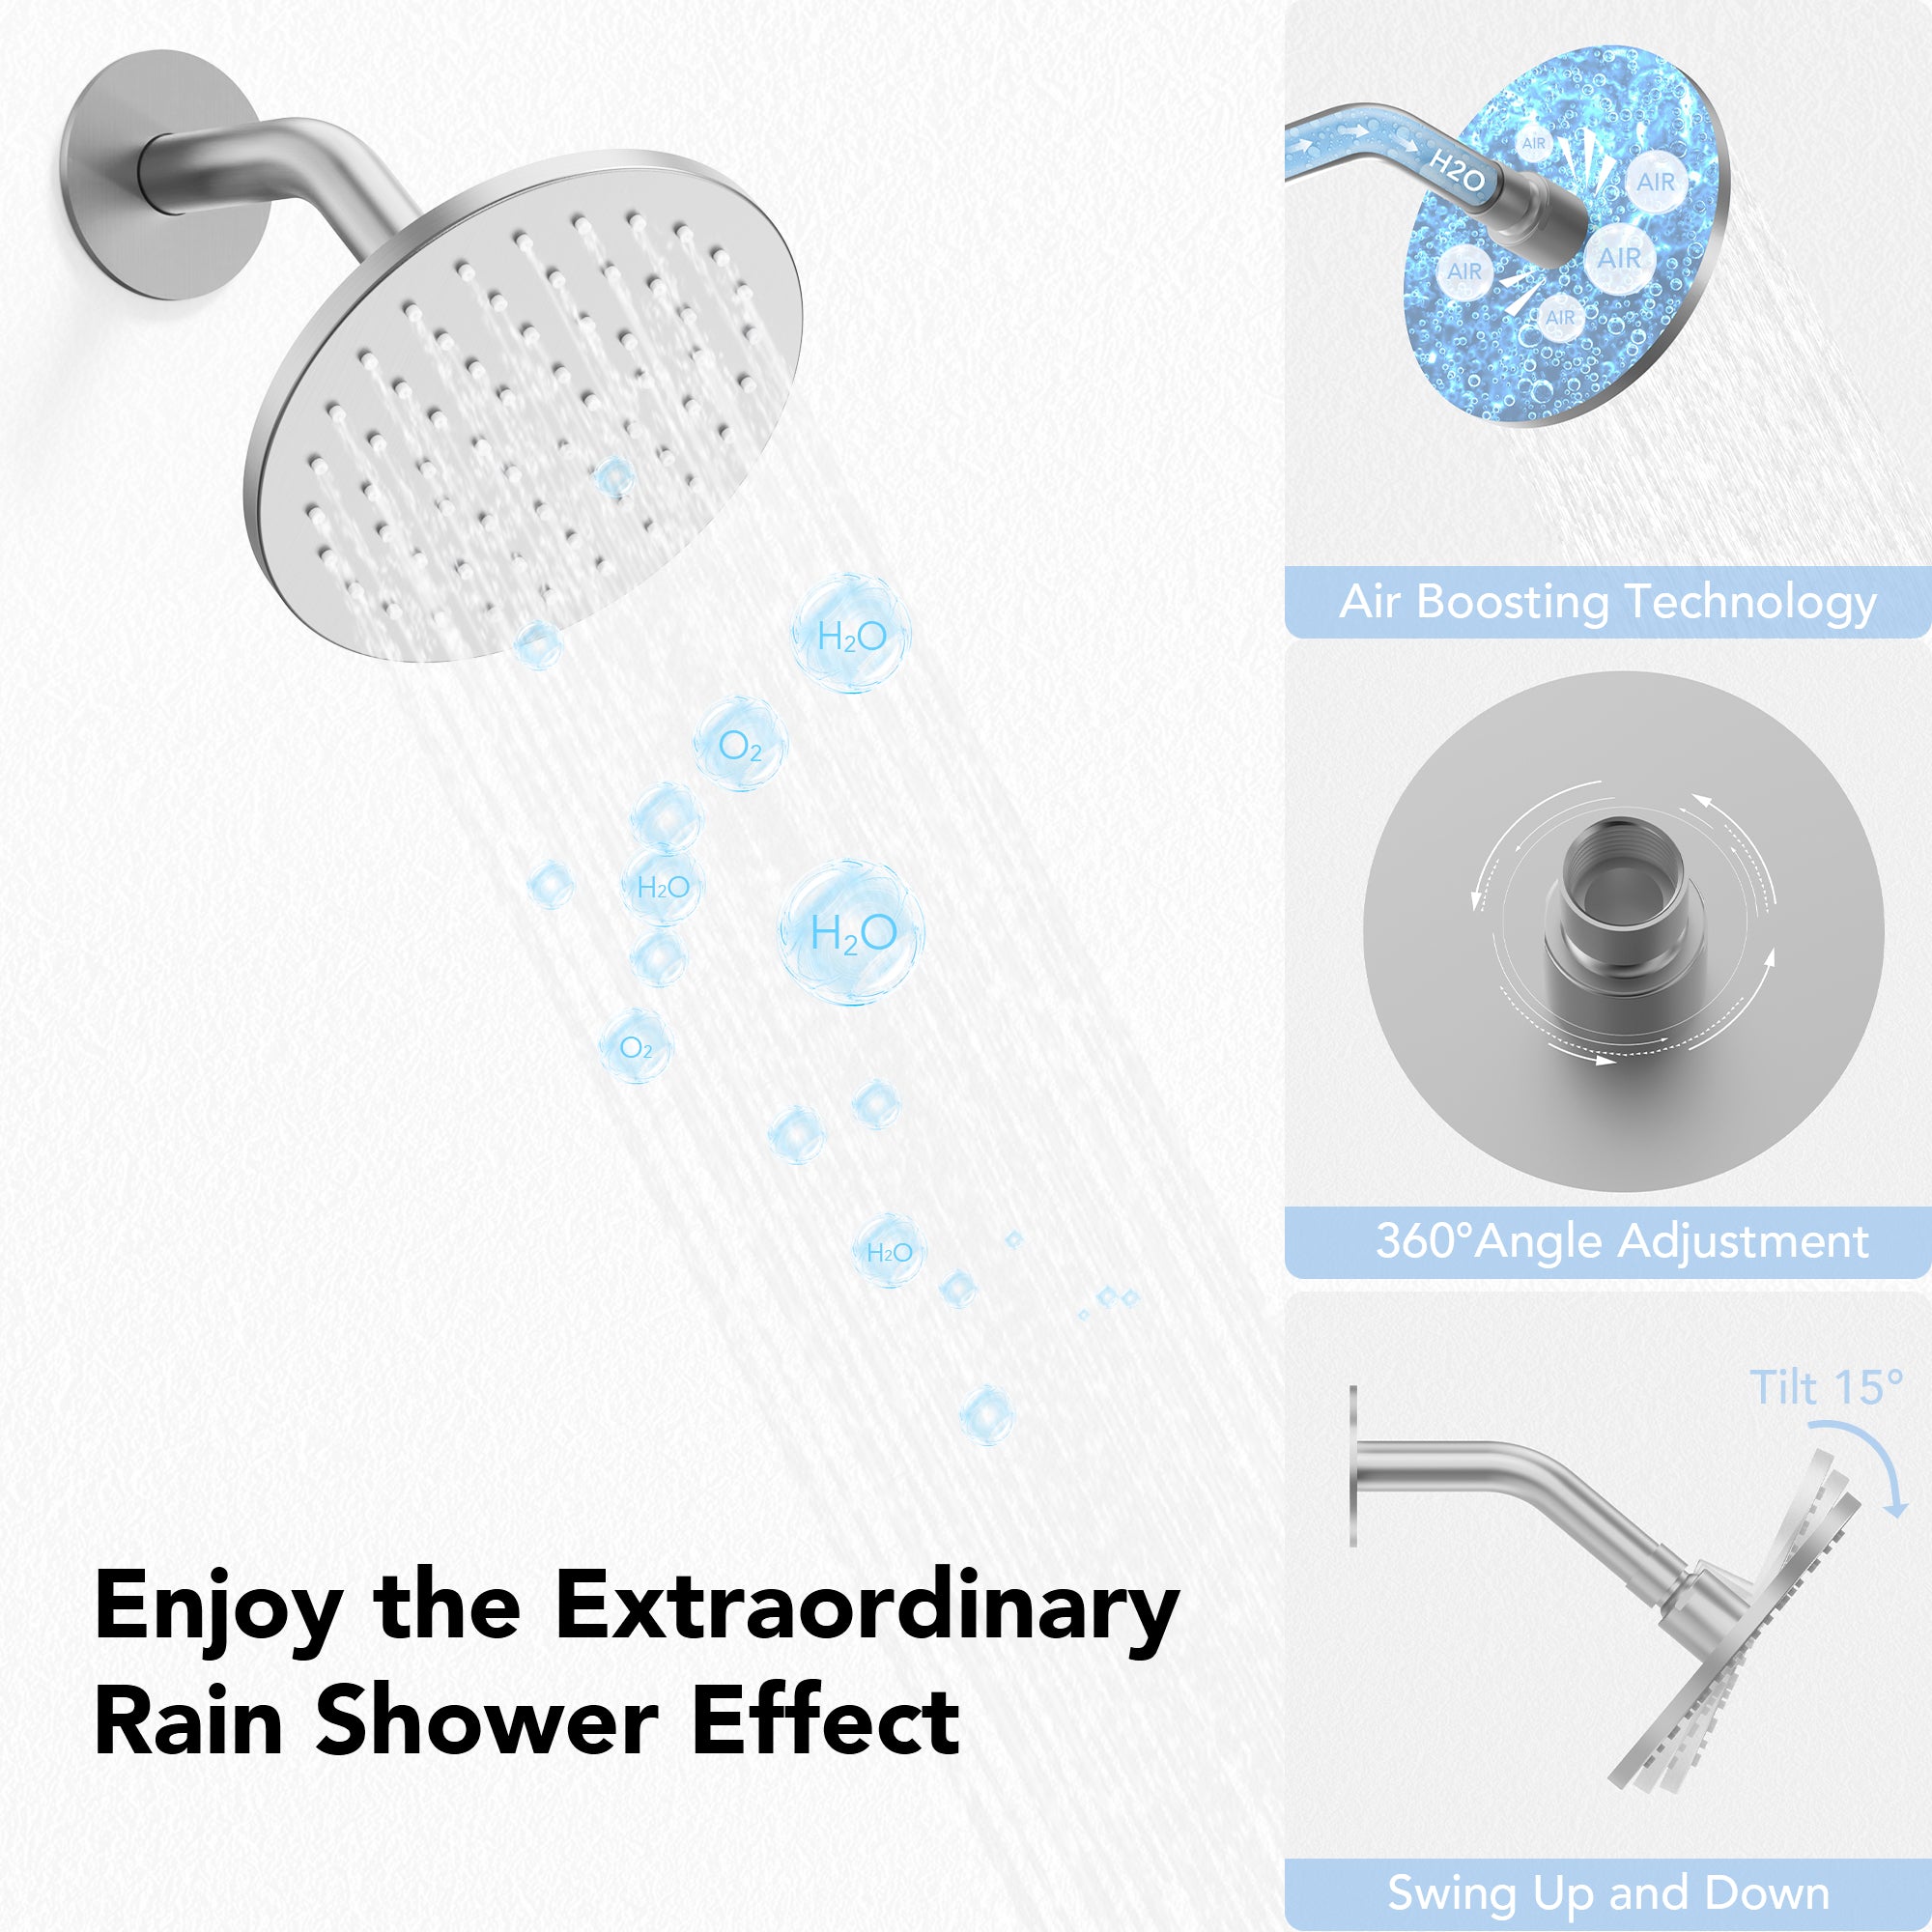 EVERSTEIN SFS-1065-NK12 12" High-Pressure Rainfall Complete Shower System with Rough-in Valve